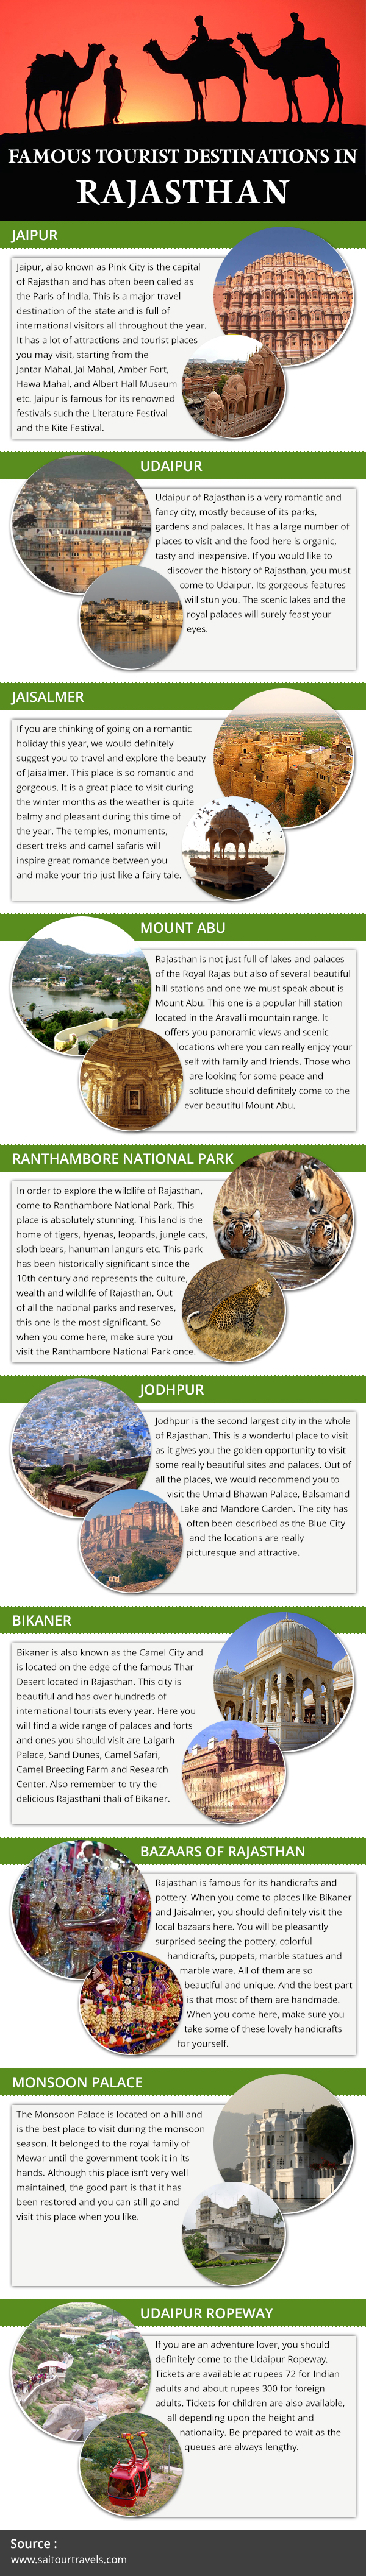 Famous-Tourist-Destinations-in-Rajasthan